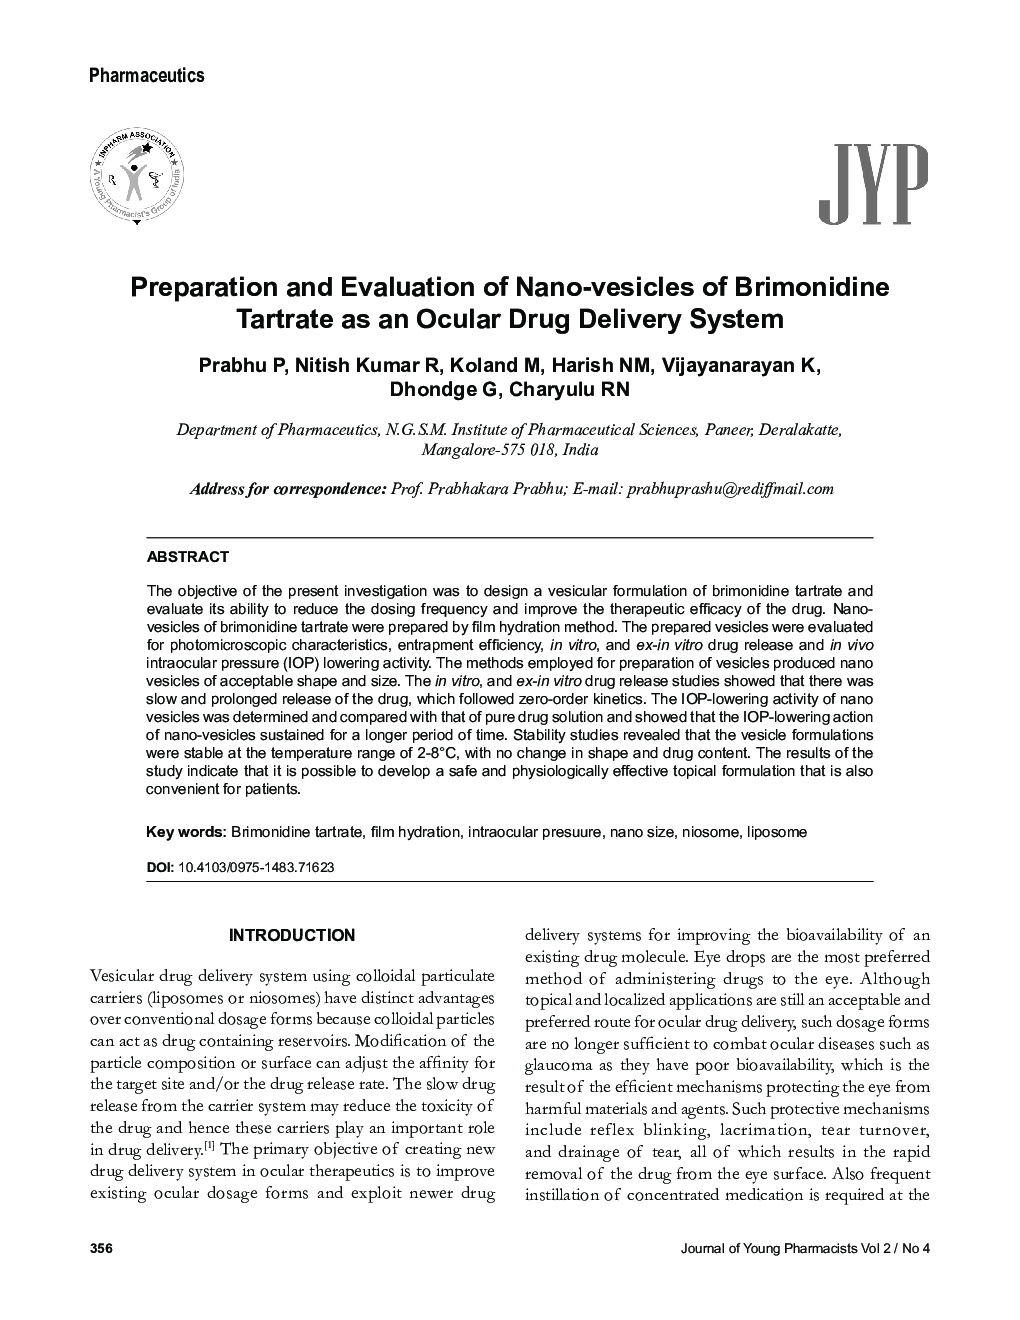 Preparation and Evaluation of Nano-vesicles of Brimonidine Tartrate as an Ocular Drug Delivery System